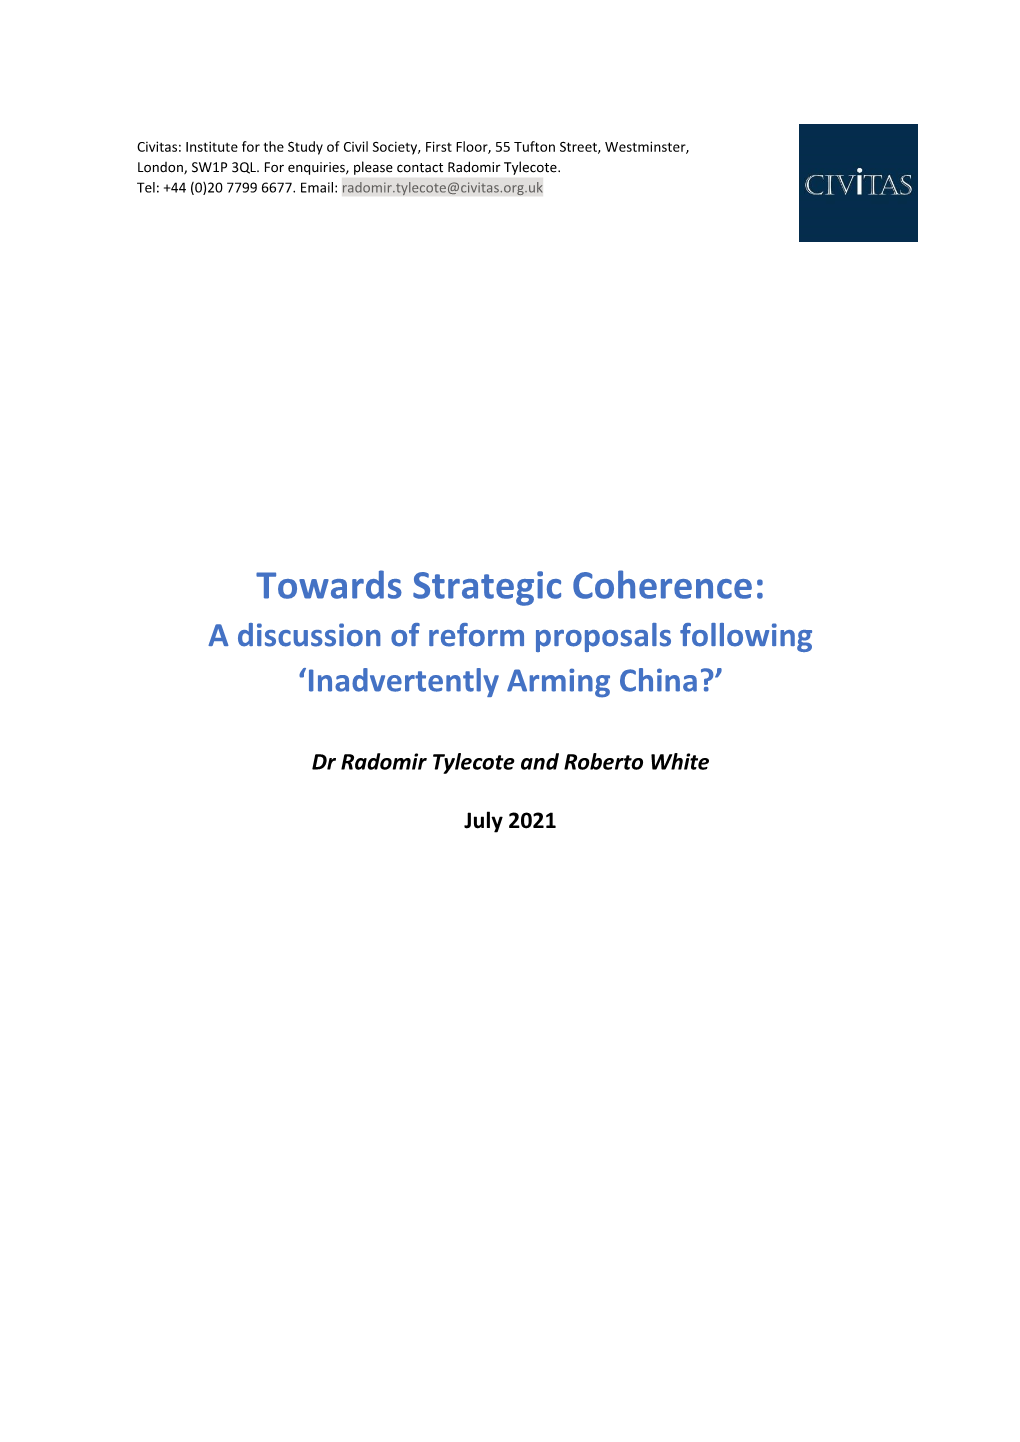 Towards Strategic Coherence: a Discussion of Reform Proposals Following ‘Inadvertently Arming China?’